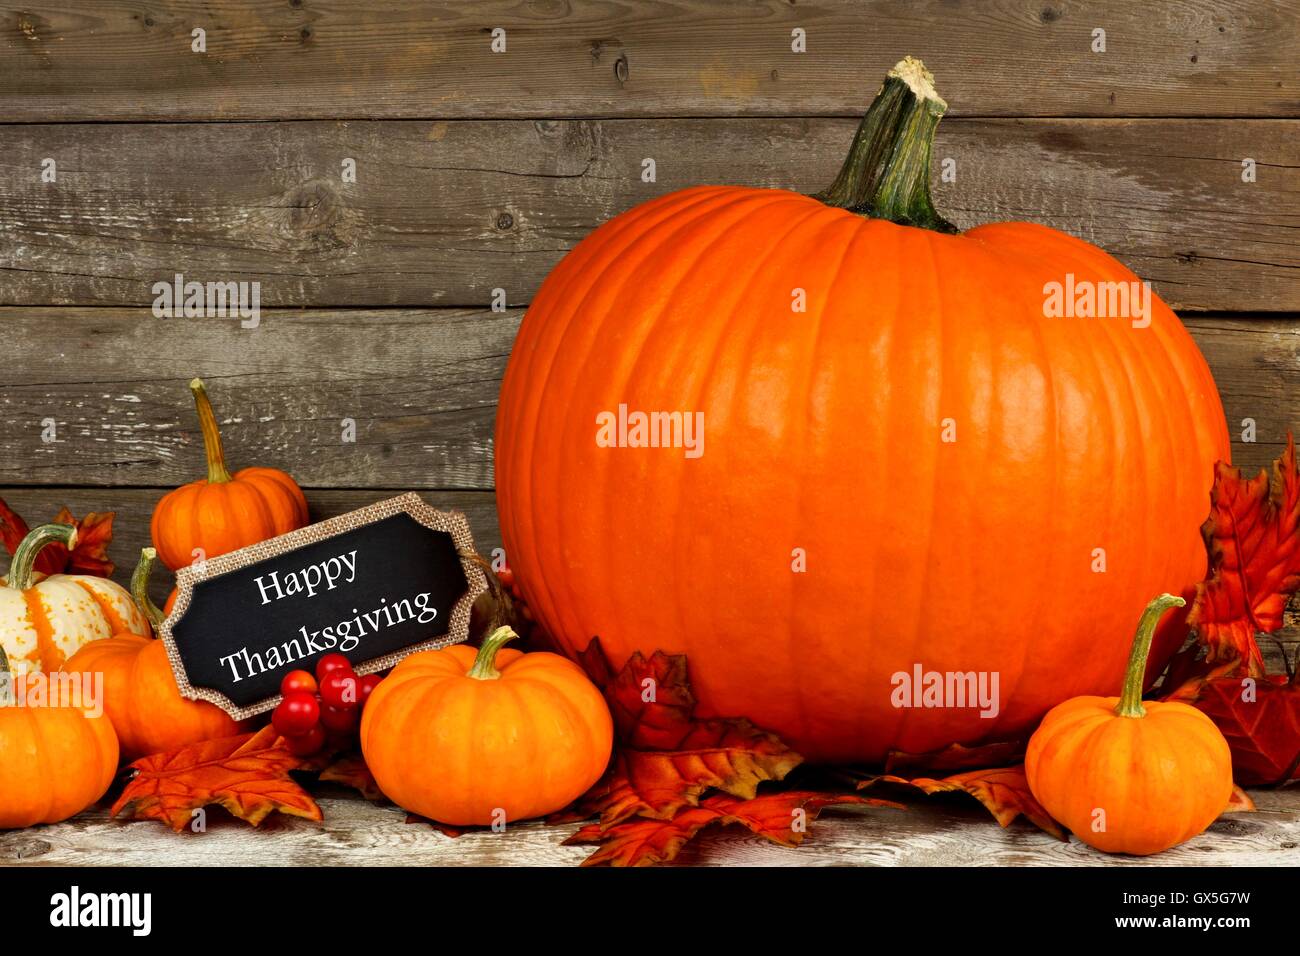 Autumn pumpkins with Happy Thanksgiving chalkboard tag against a rustic wood background Stock Photo